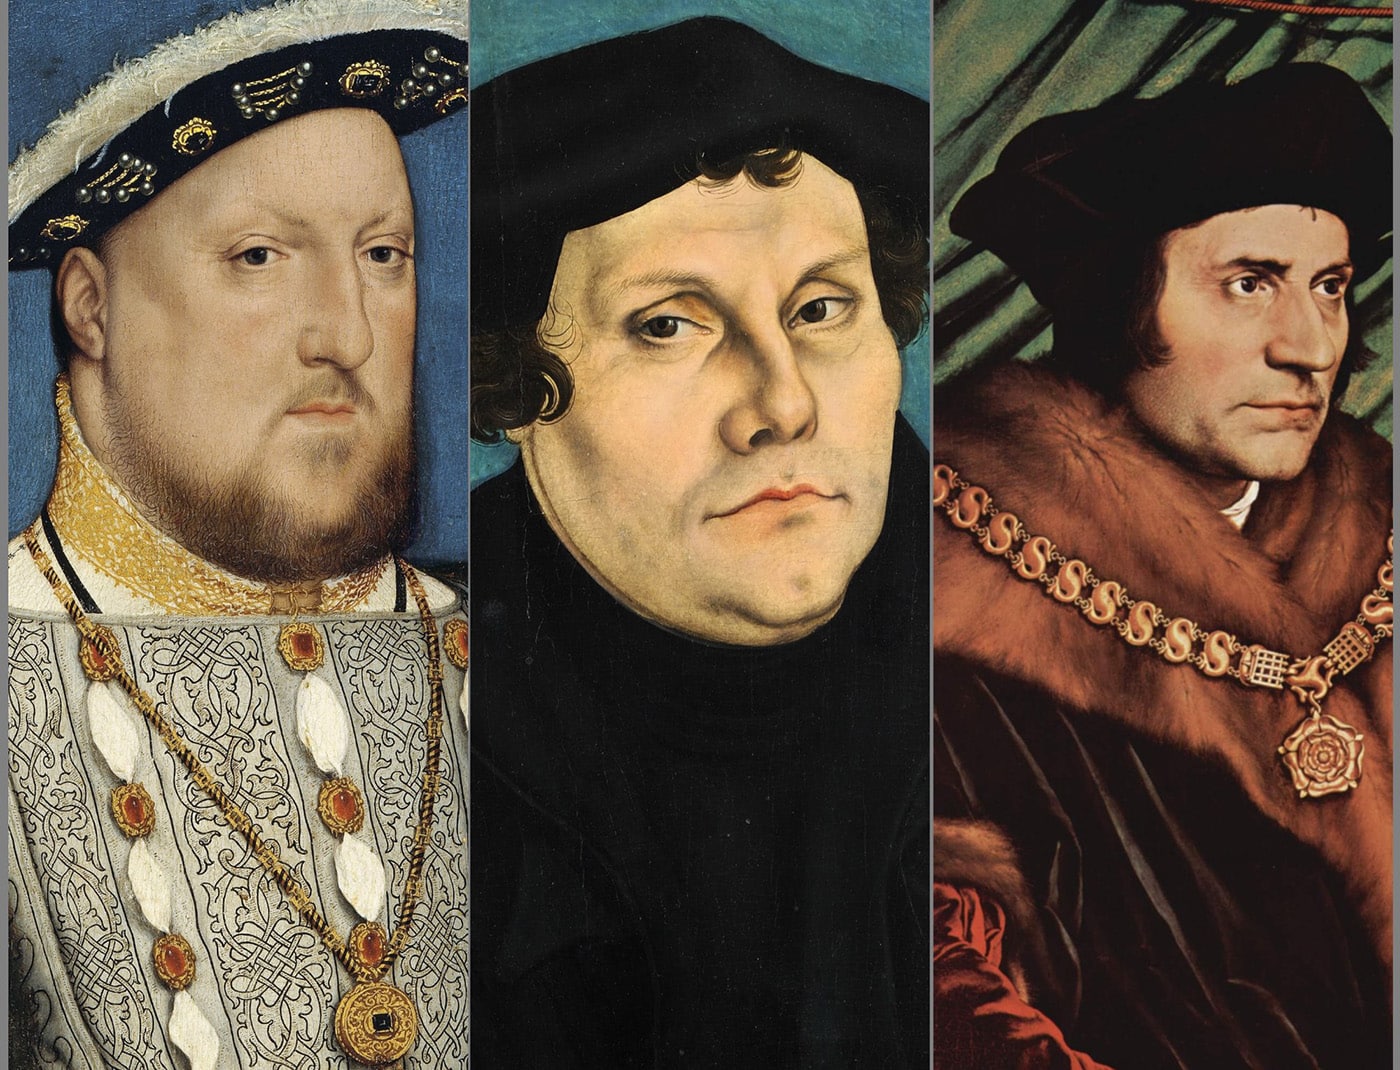 HENRY VIII, MARTIN LUTHER, ST. THOMAS MOORE